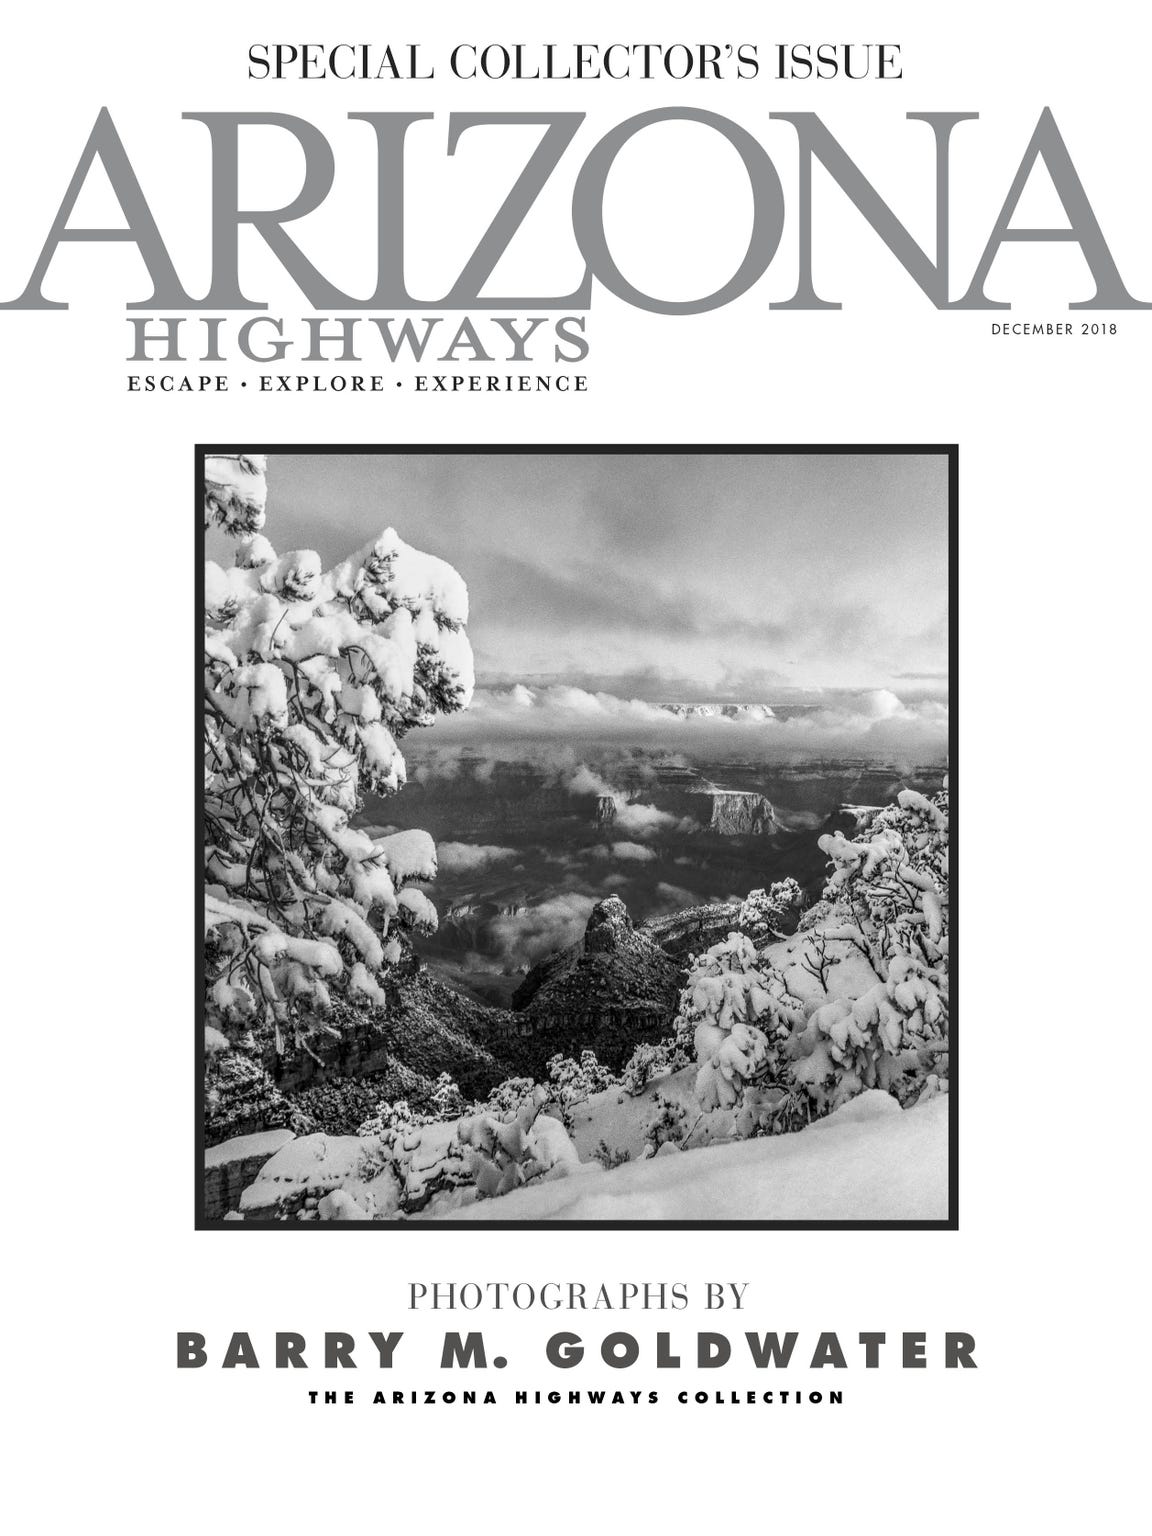 The Barry Goldwater photography issue by Arizona Highways.